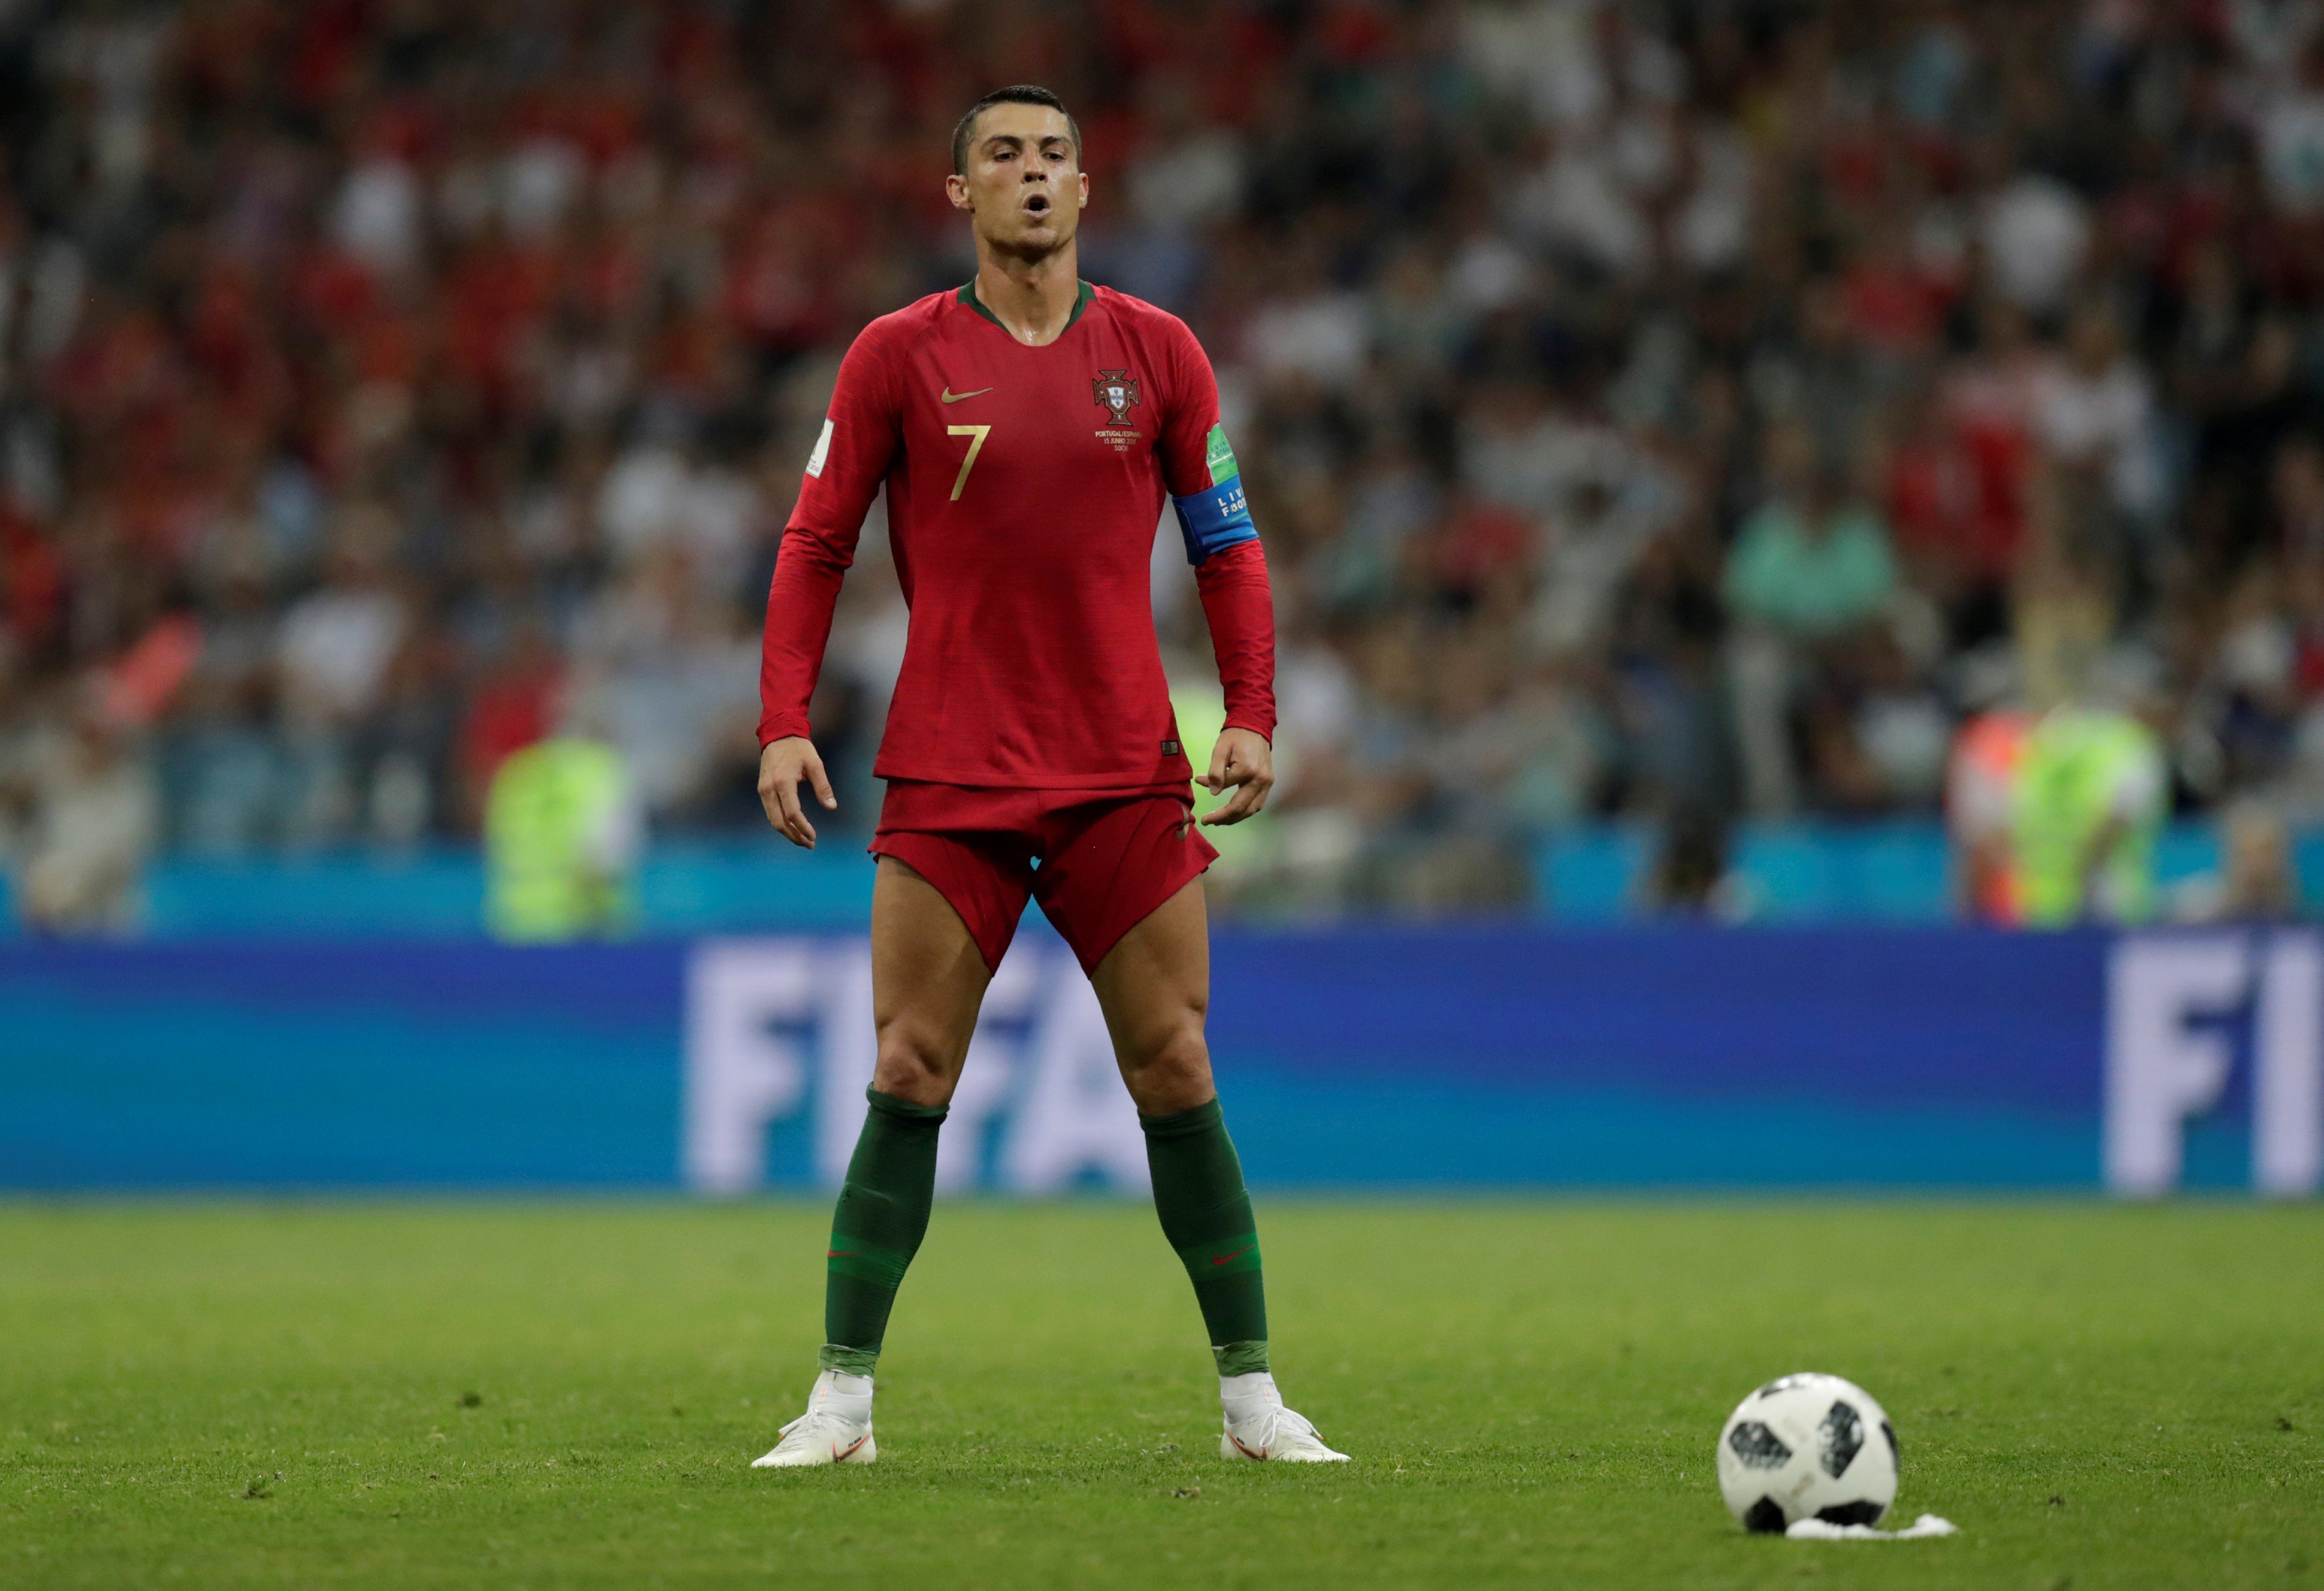 The best photos of the 2018 World Cup